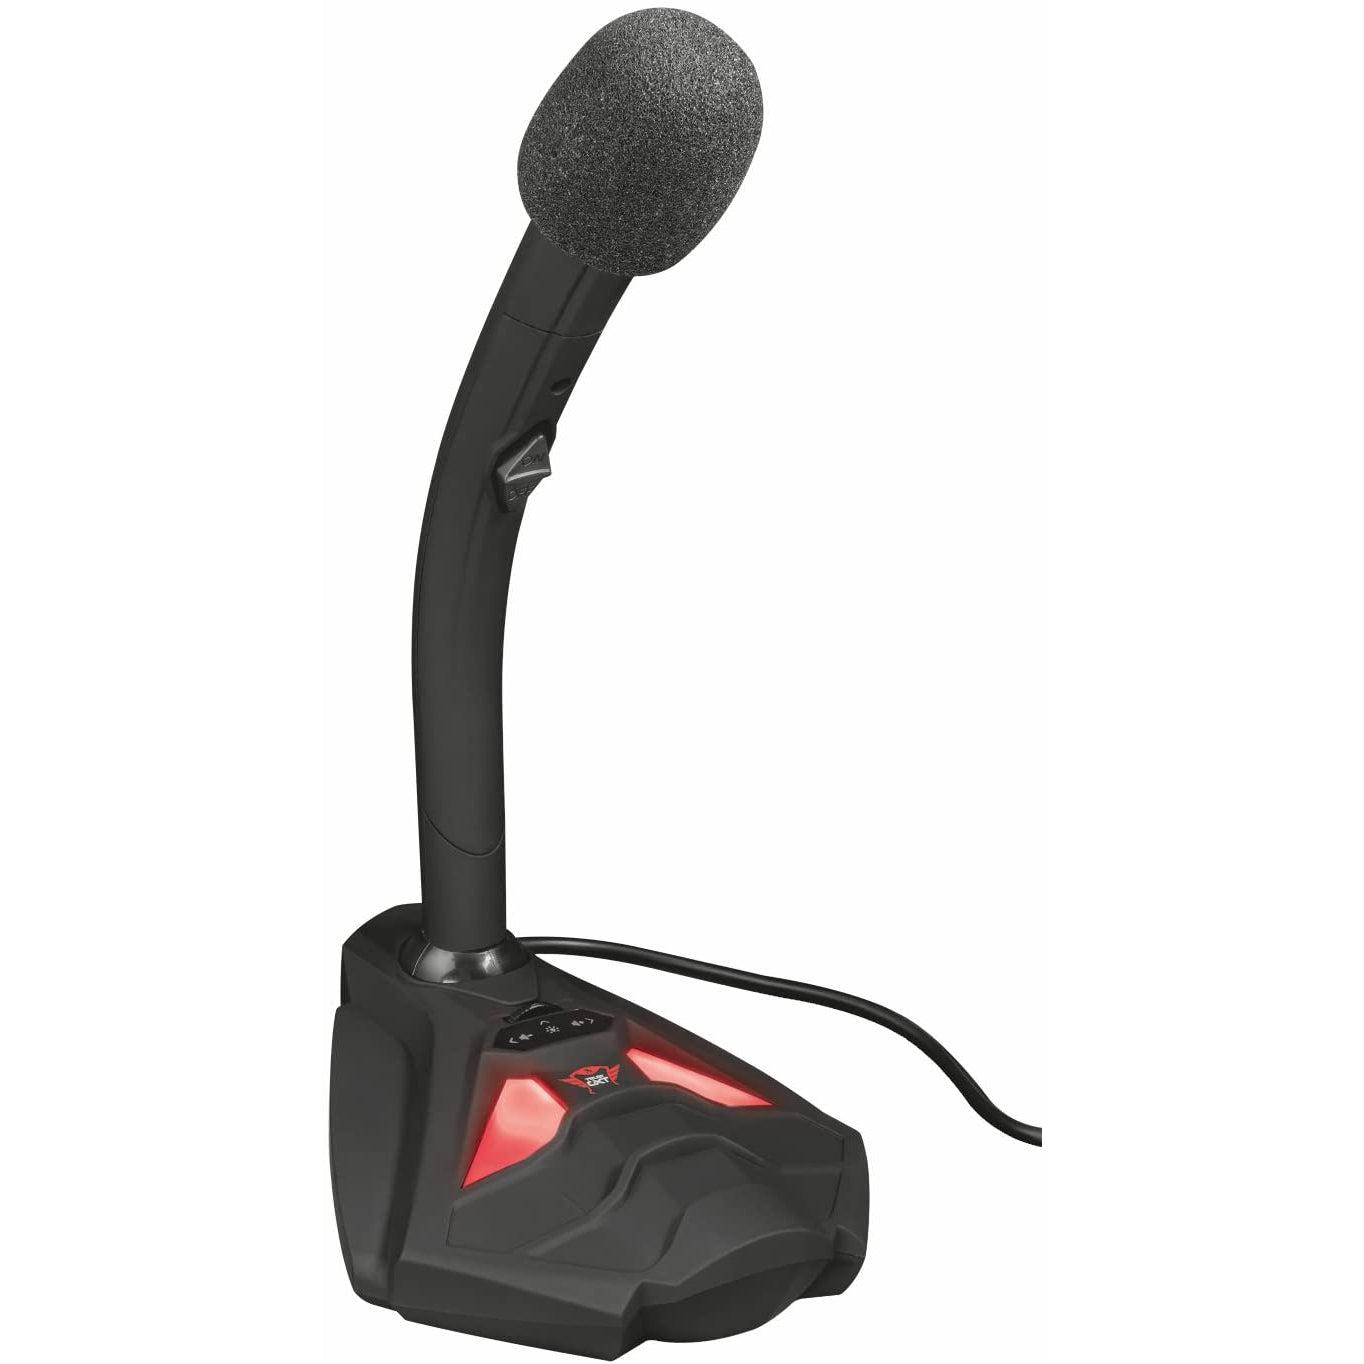 Trust Gaming Reyno Streaming Pack in Black and Red, USB Microphone and Webcam